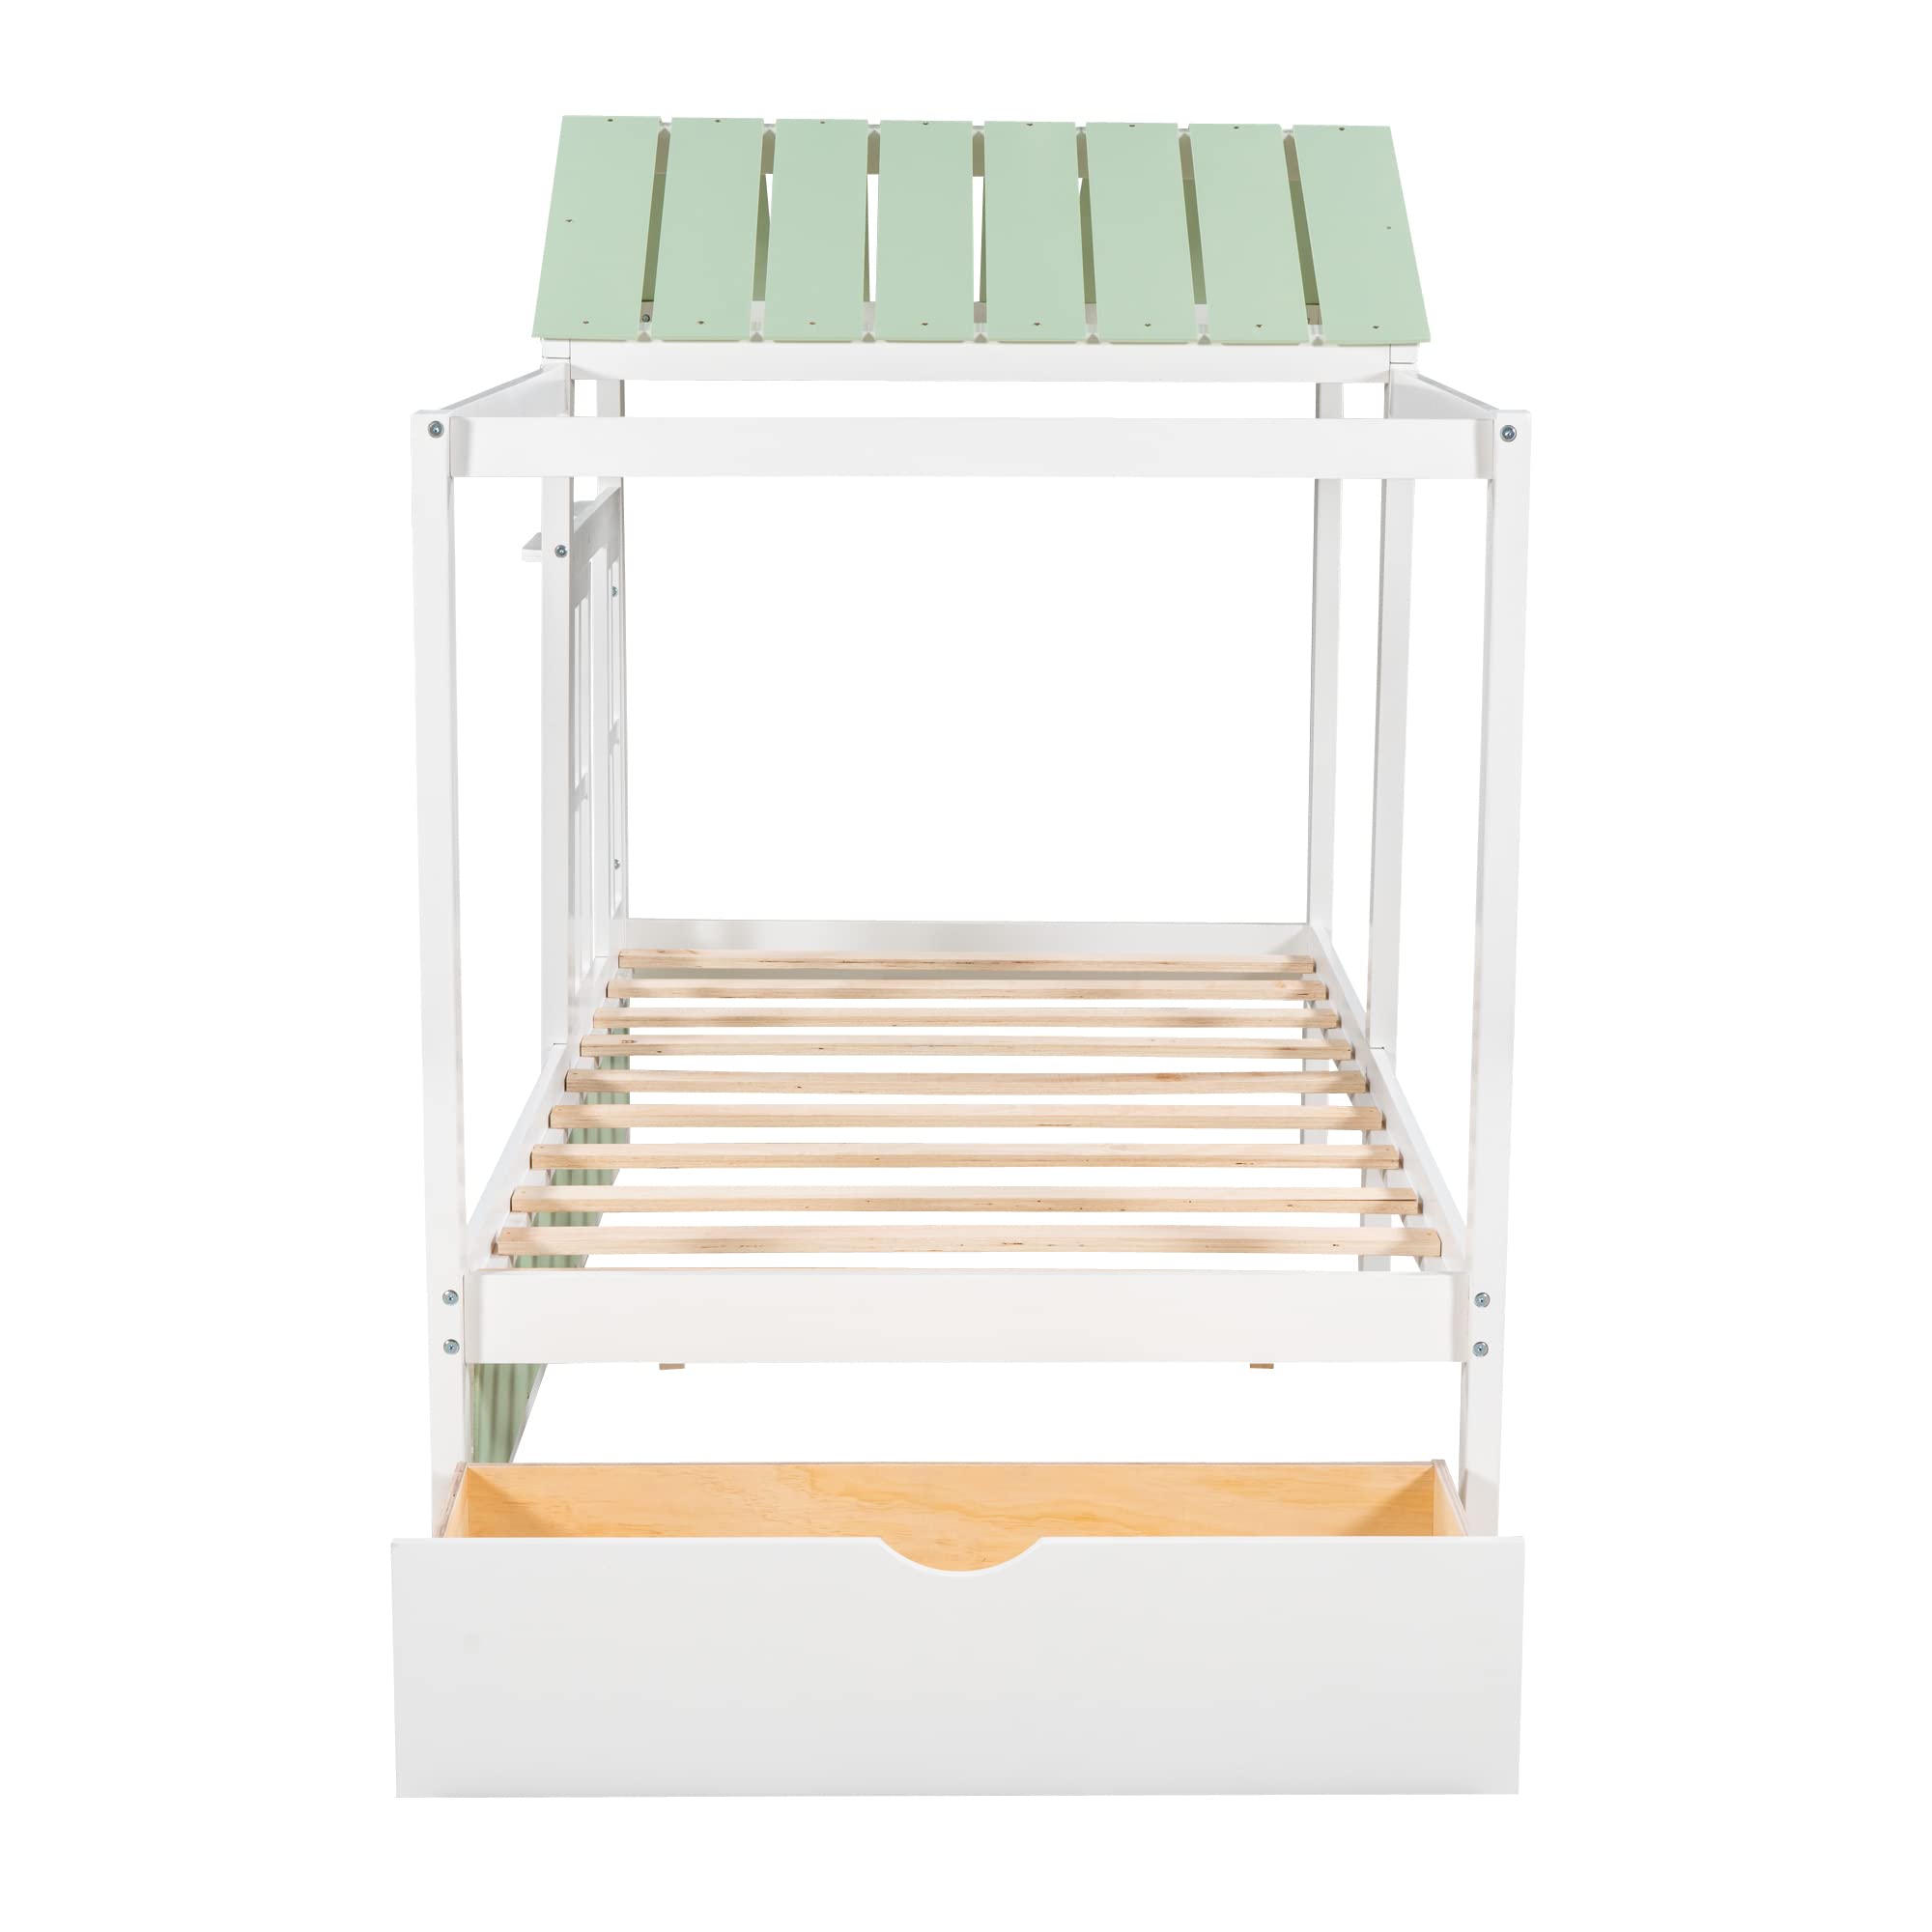 Twin House Bed with Storage Drawer for Kids Wood Cabin Tent Bed Frame for Girls Boys Montessori Beds with Roof and Window Twin Size, Green